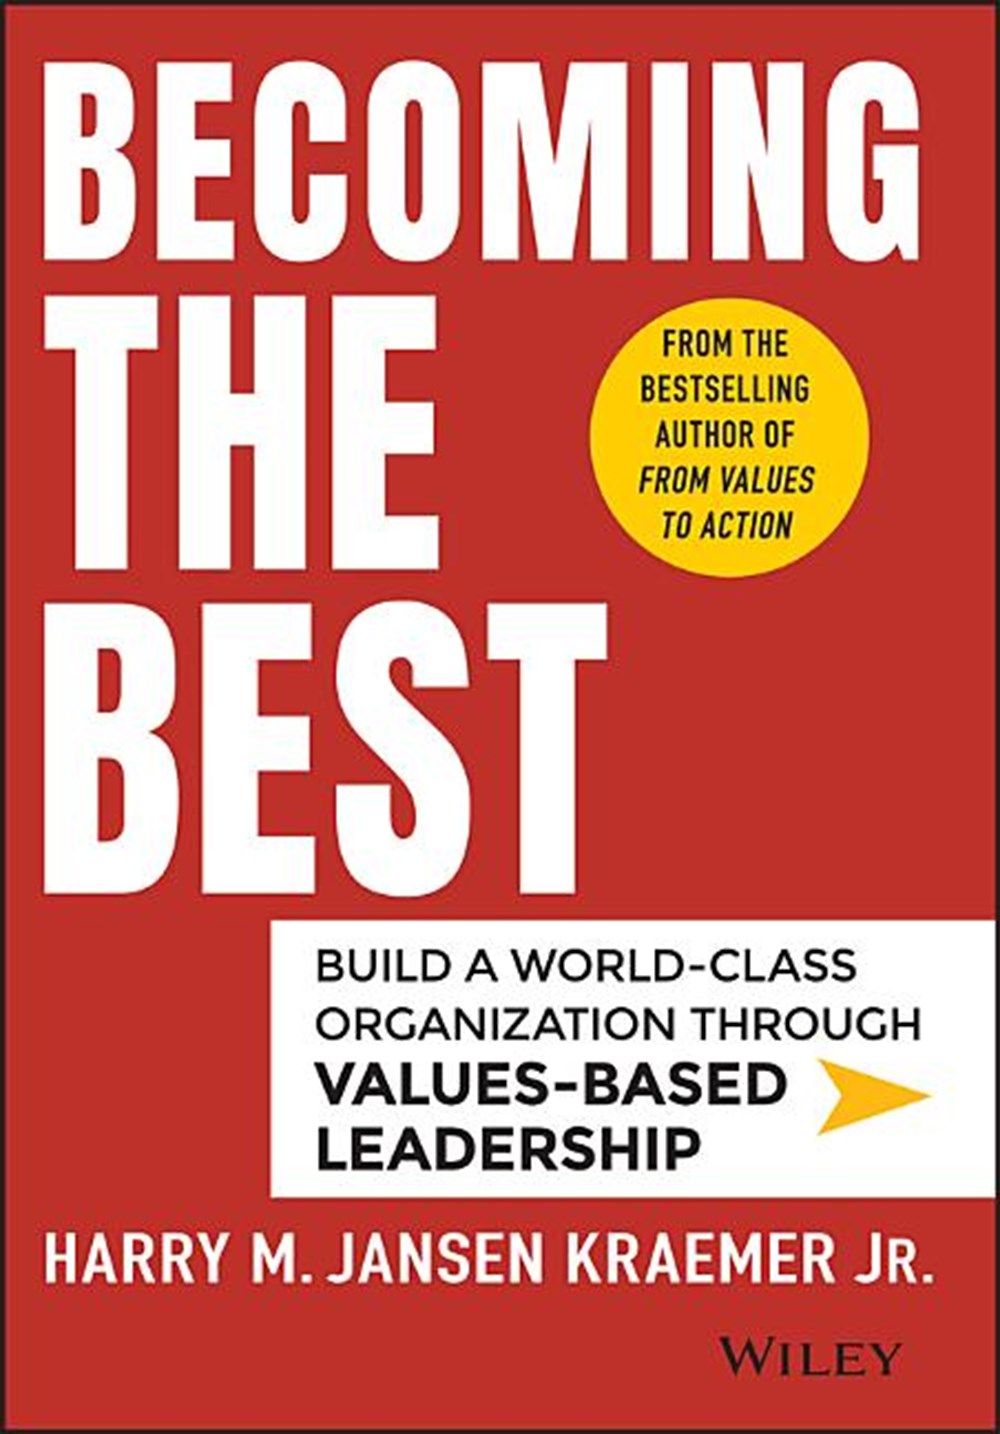 Becoming the Best Build a World-Class Organization Through Values-Based Leadership